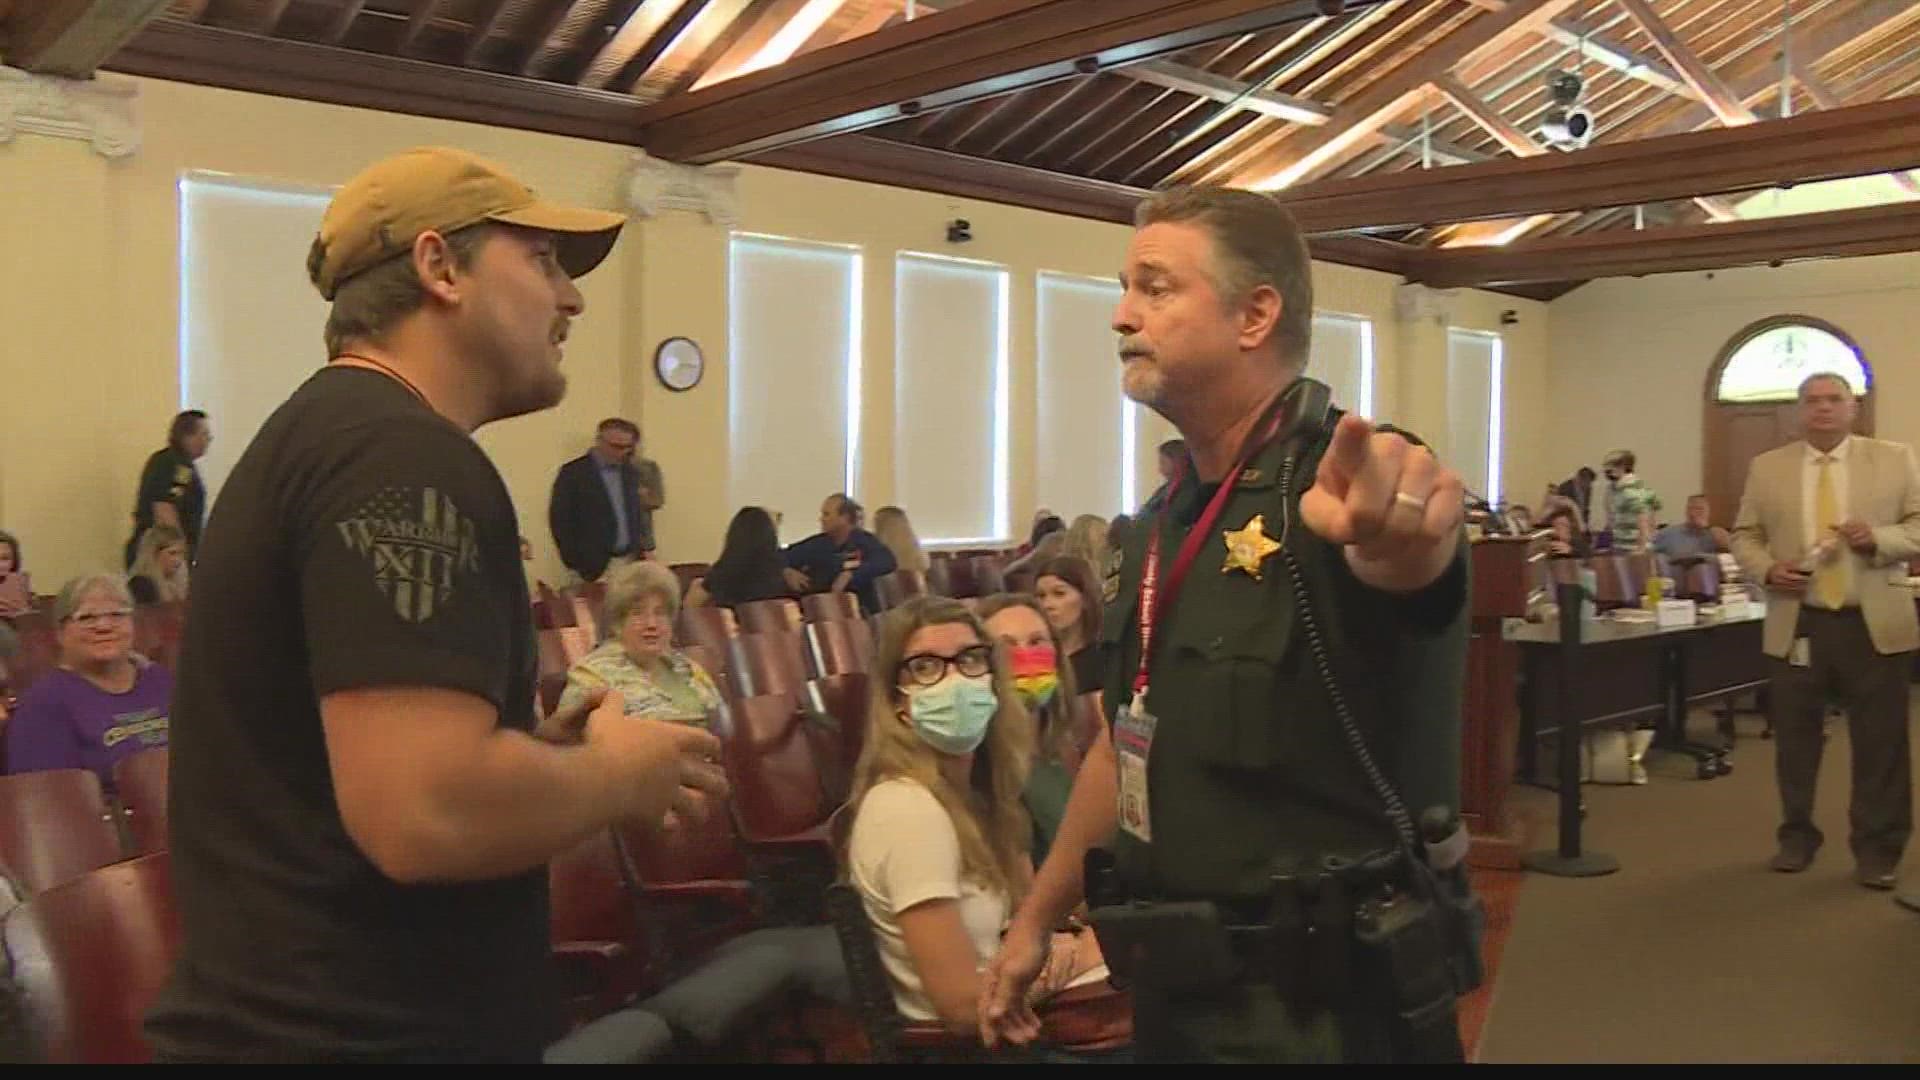 Deputies had to escort unruly individuals out of school board meeting related to a 'no' vote on banning seven books with LGBTQ and racial subject matter